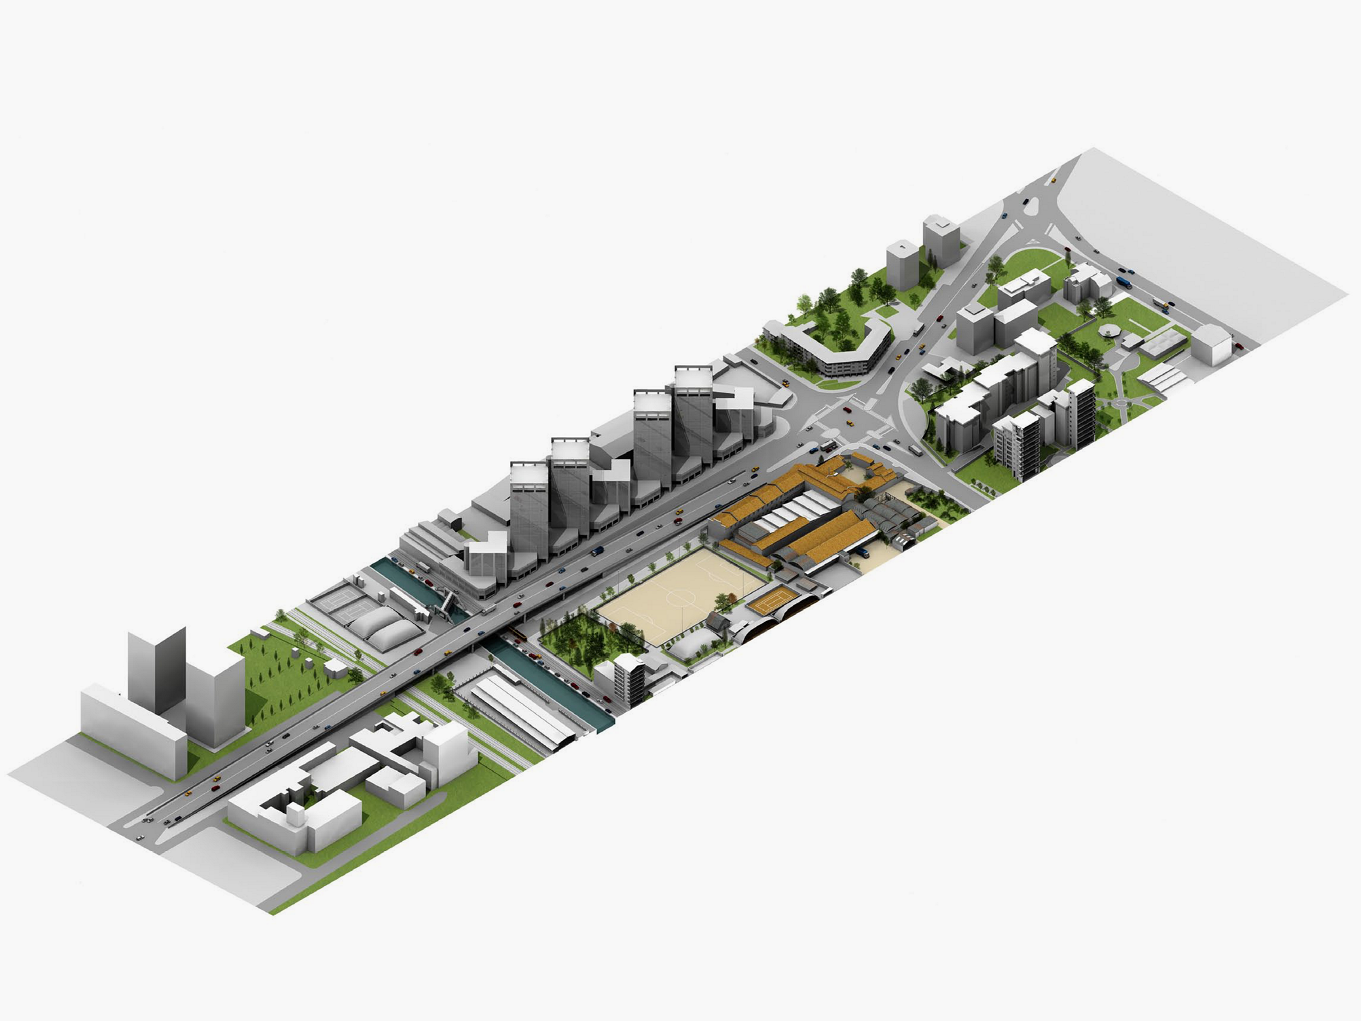 Urban Agriculture Centre 3D Section Model